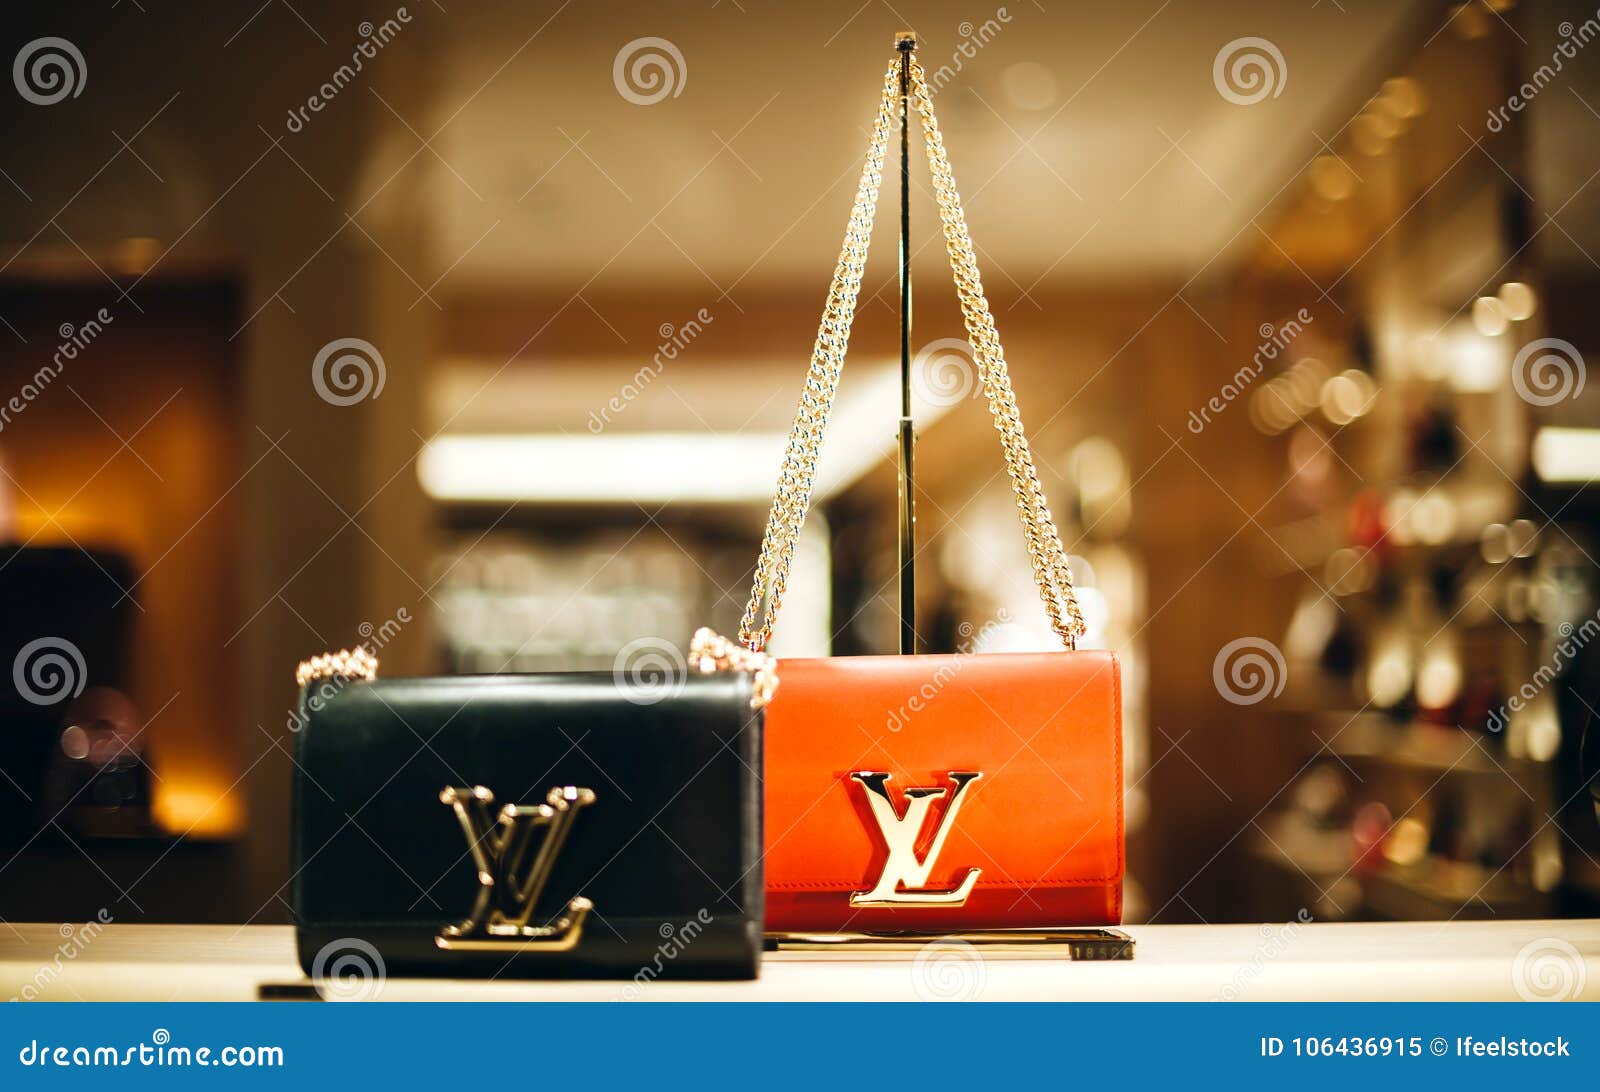 Luxury Leather Louis Vuitton LVMH Leather Bags Editorial Image - Image of chic, beautiful: 106436915